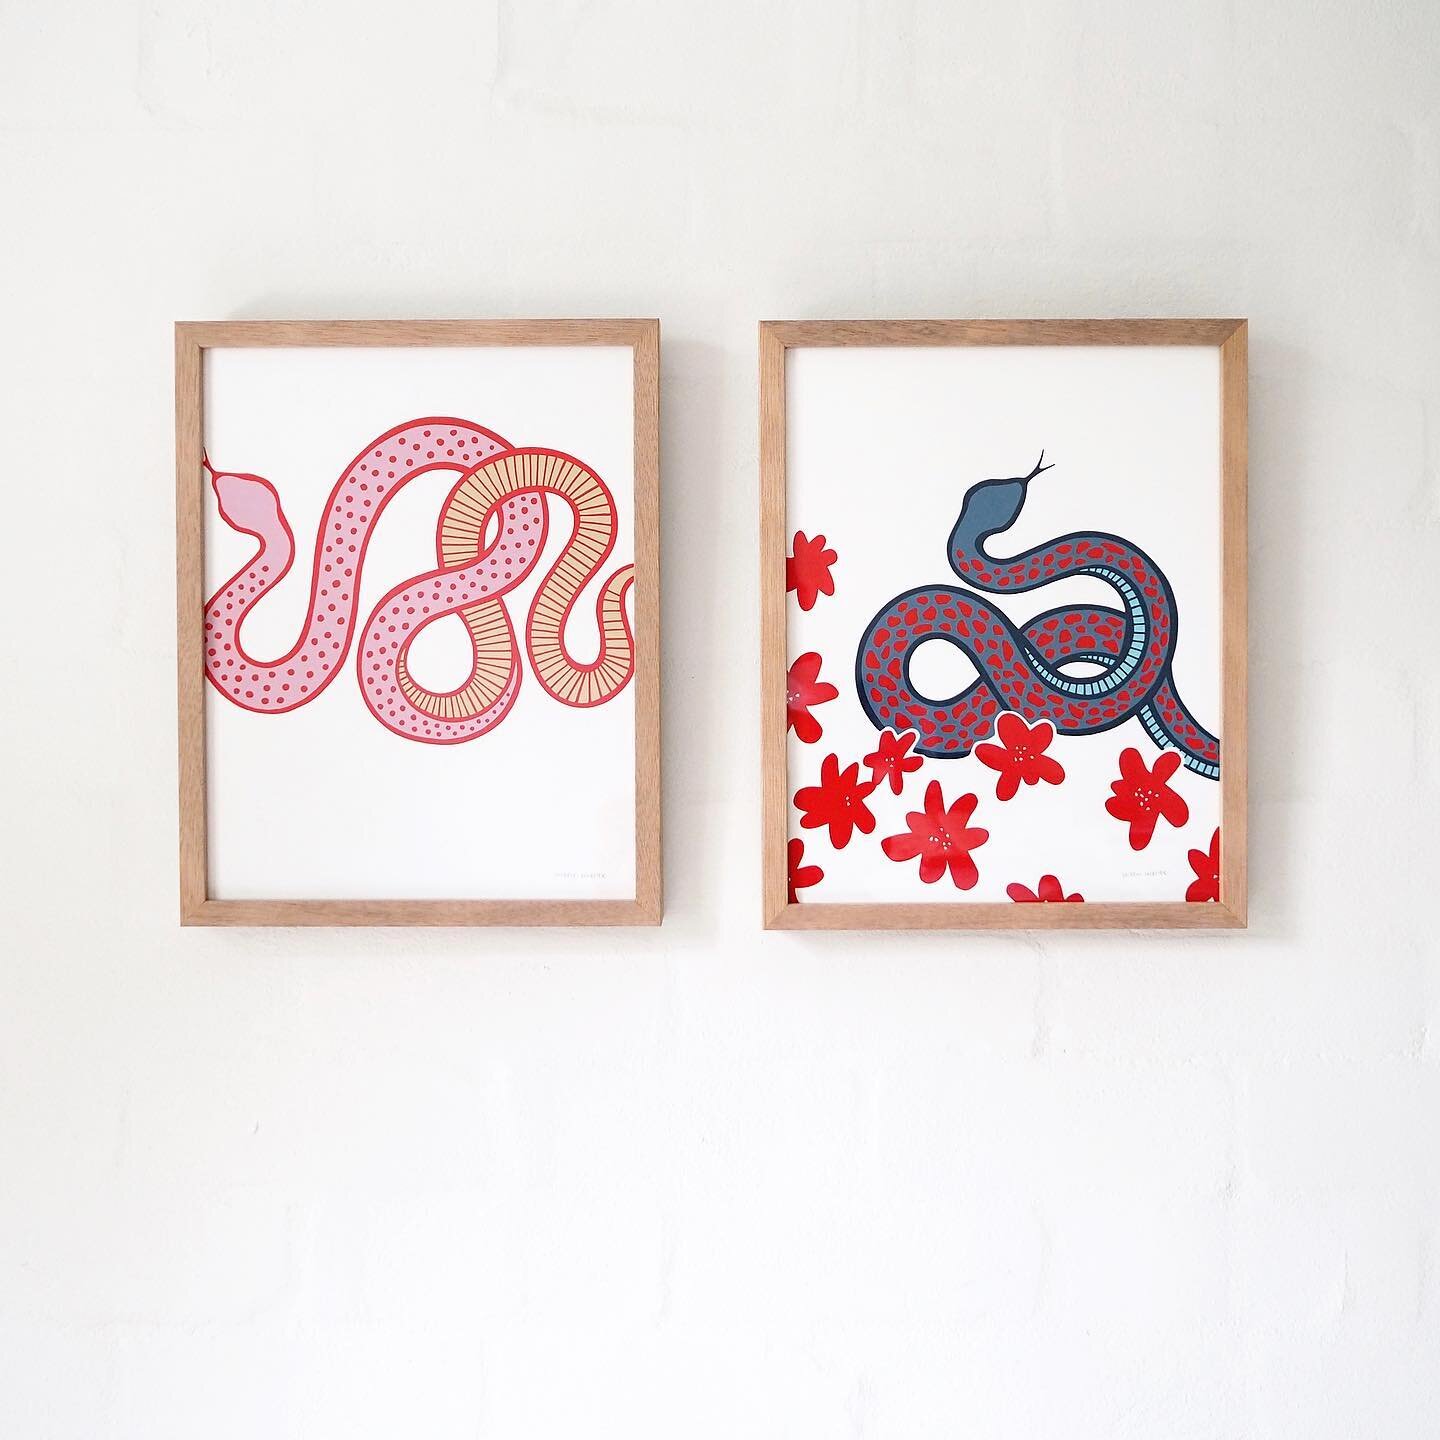 PRETTY. PAIR. 
Coupla little pretties. This pair of garden snakes are amongst the new small artworks most recently delivered to @bowandarrowstore in Manly. Original acrylic on paper paintings with custom timber frames, these pieces are hanging in the